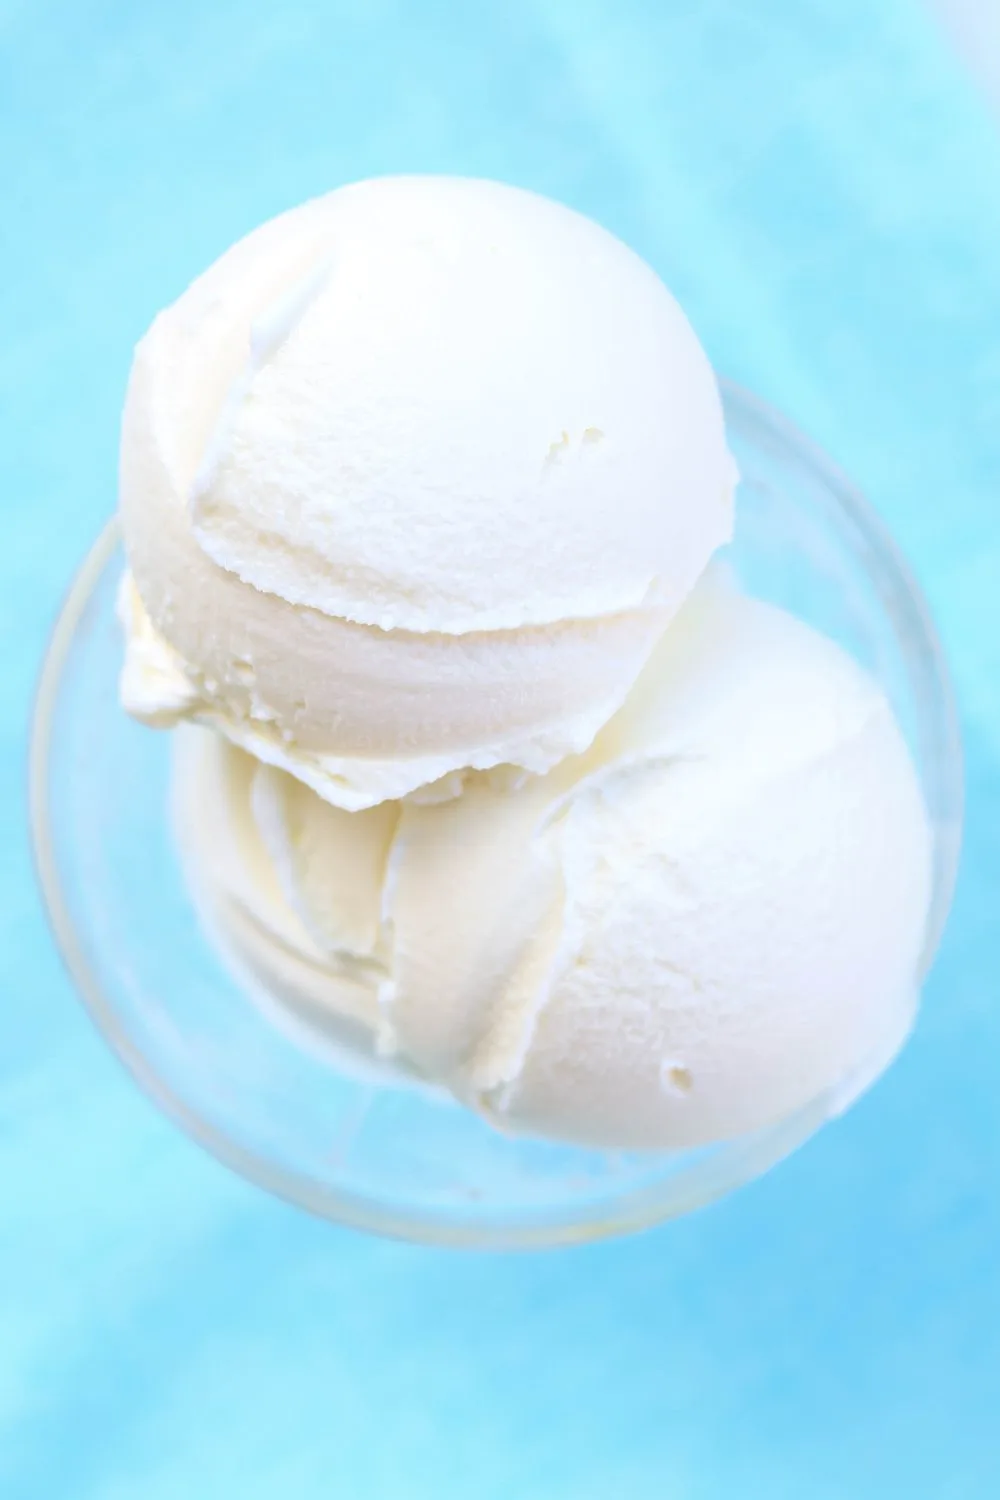 close-up view of scoops of silky smooth Ninja Creami vanilla ice cream made with Cool Whip, served in a glass dish.